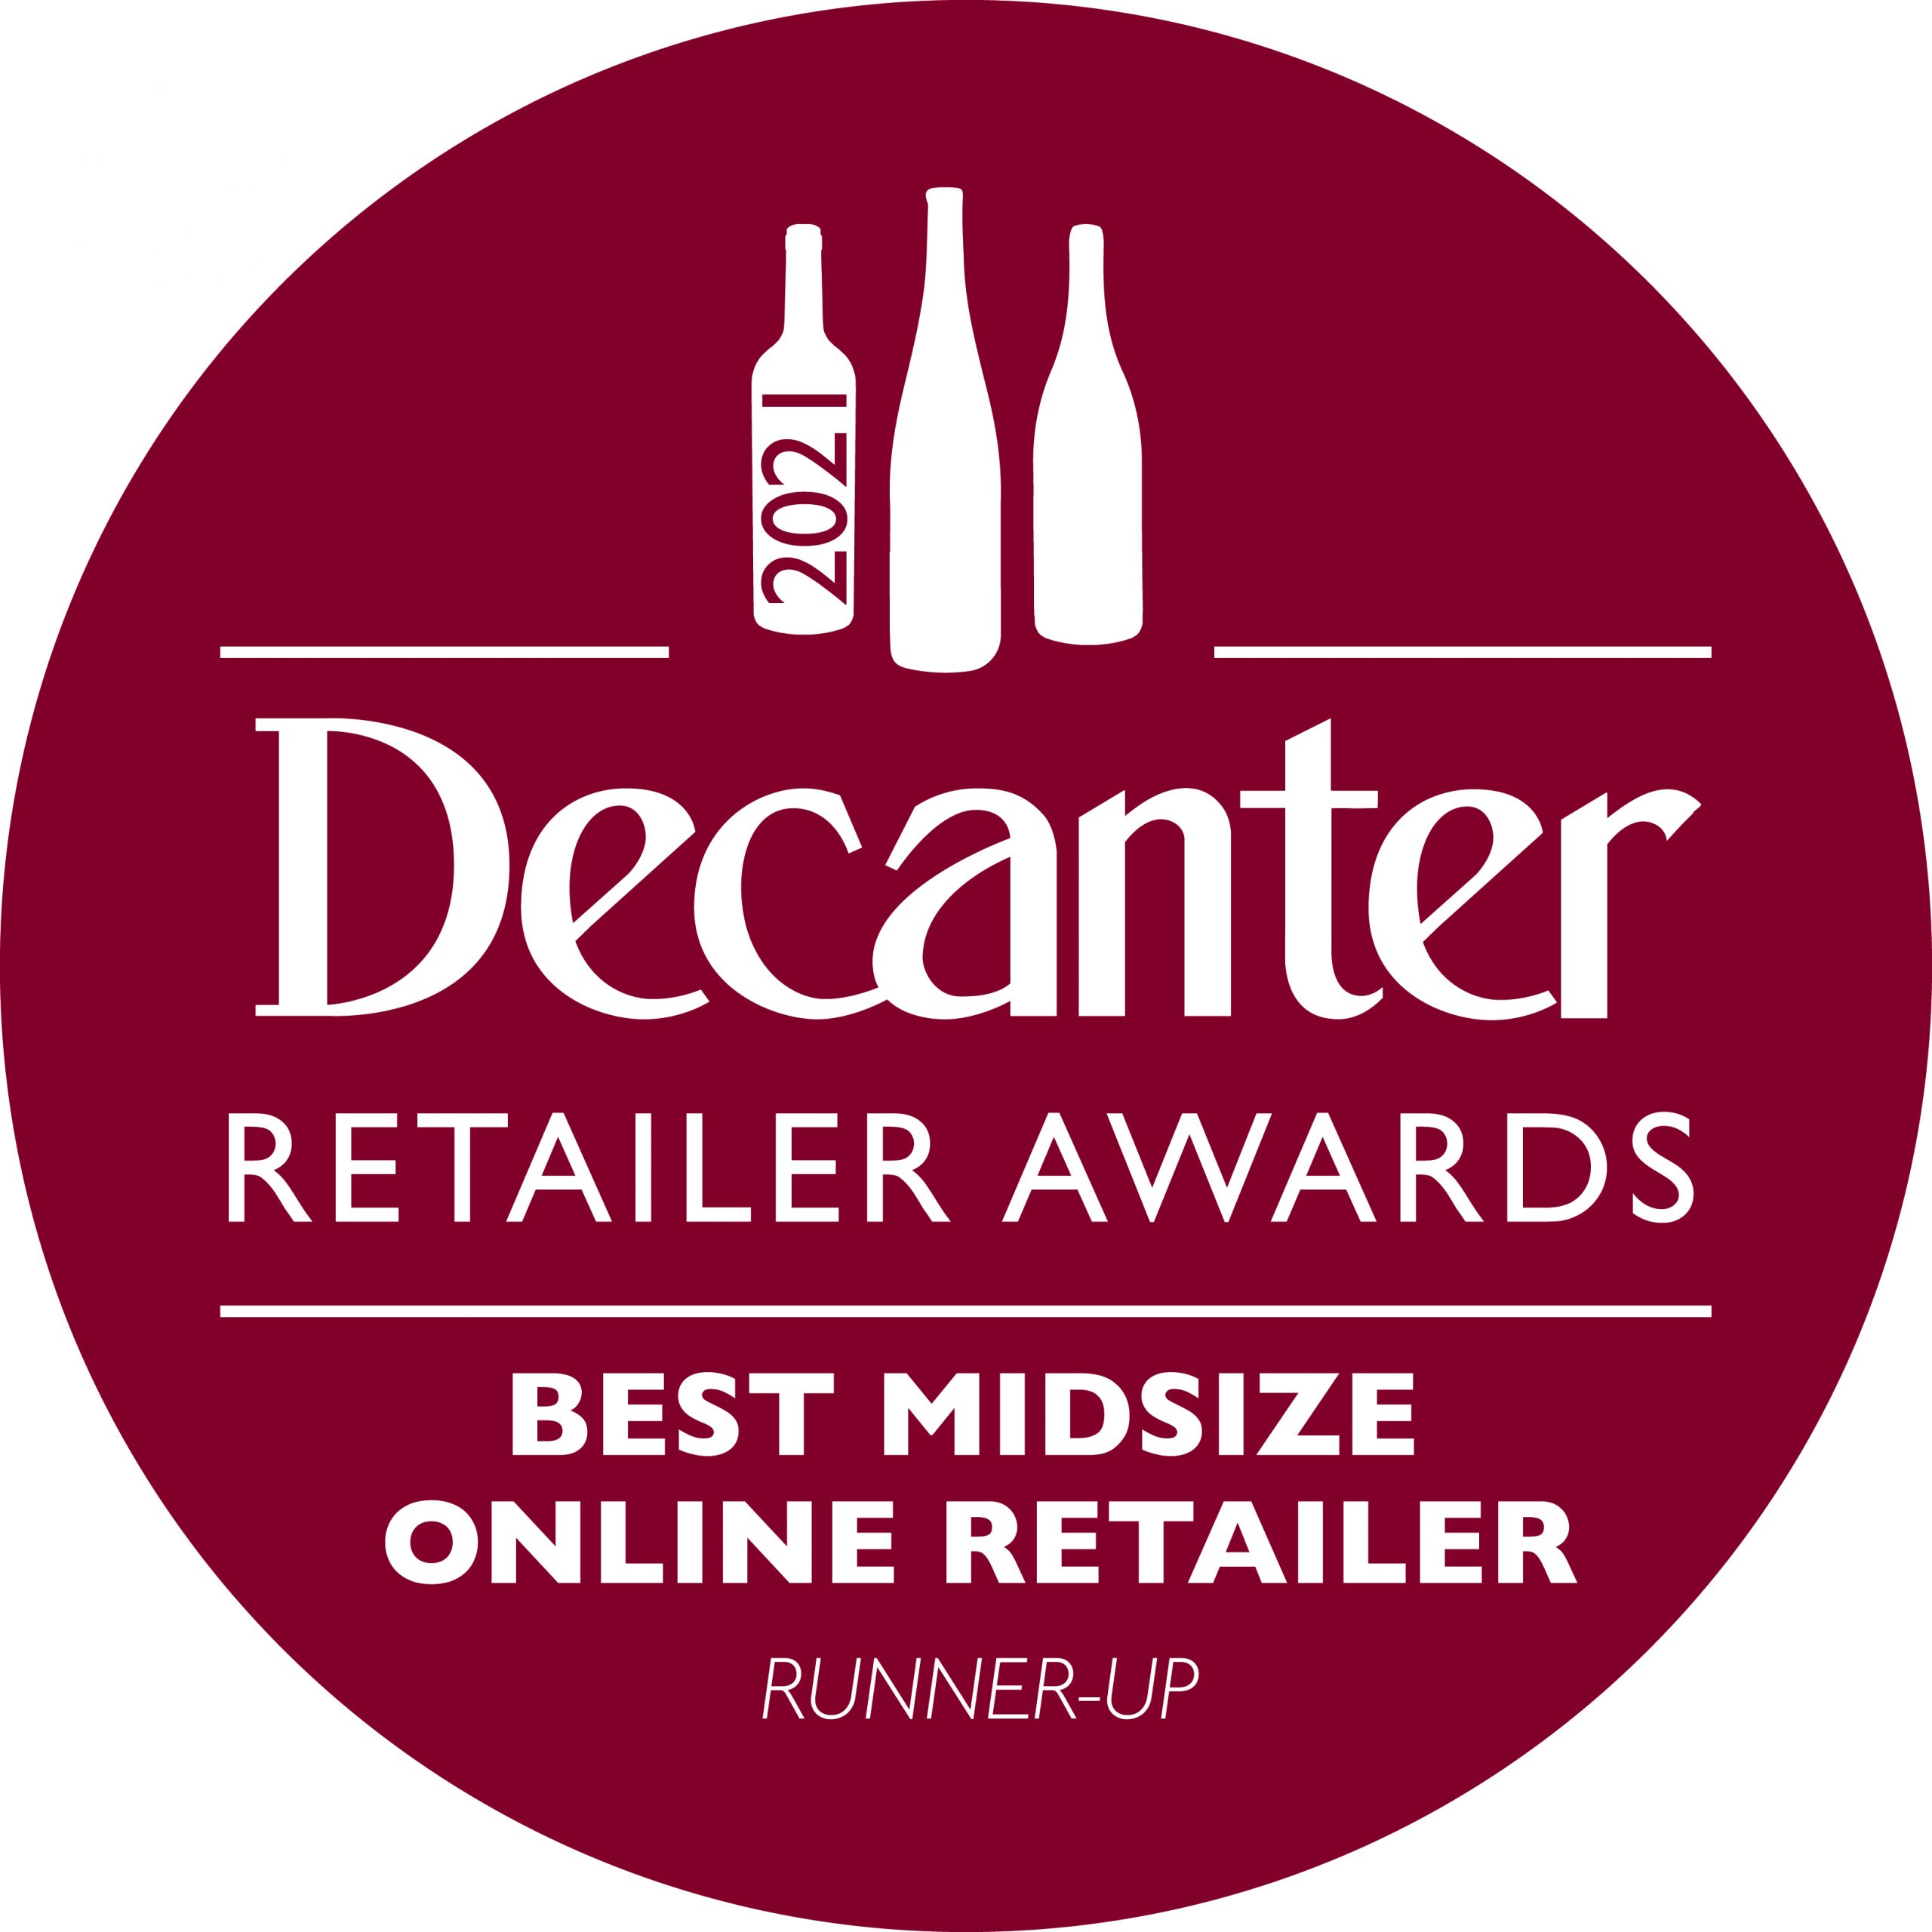 Decanter Midsize Online Retailer of the Year Runner Up 2021!